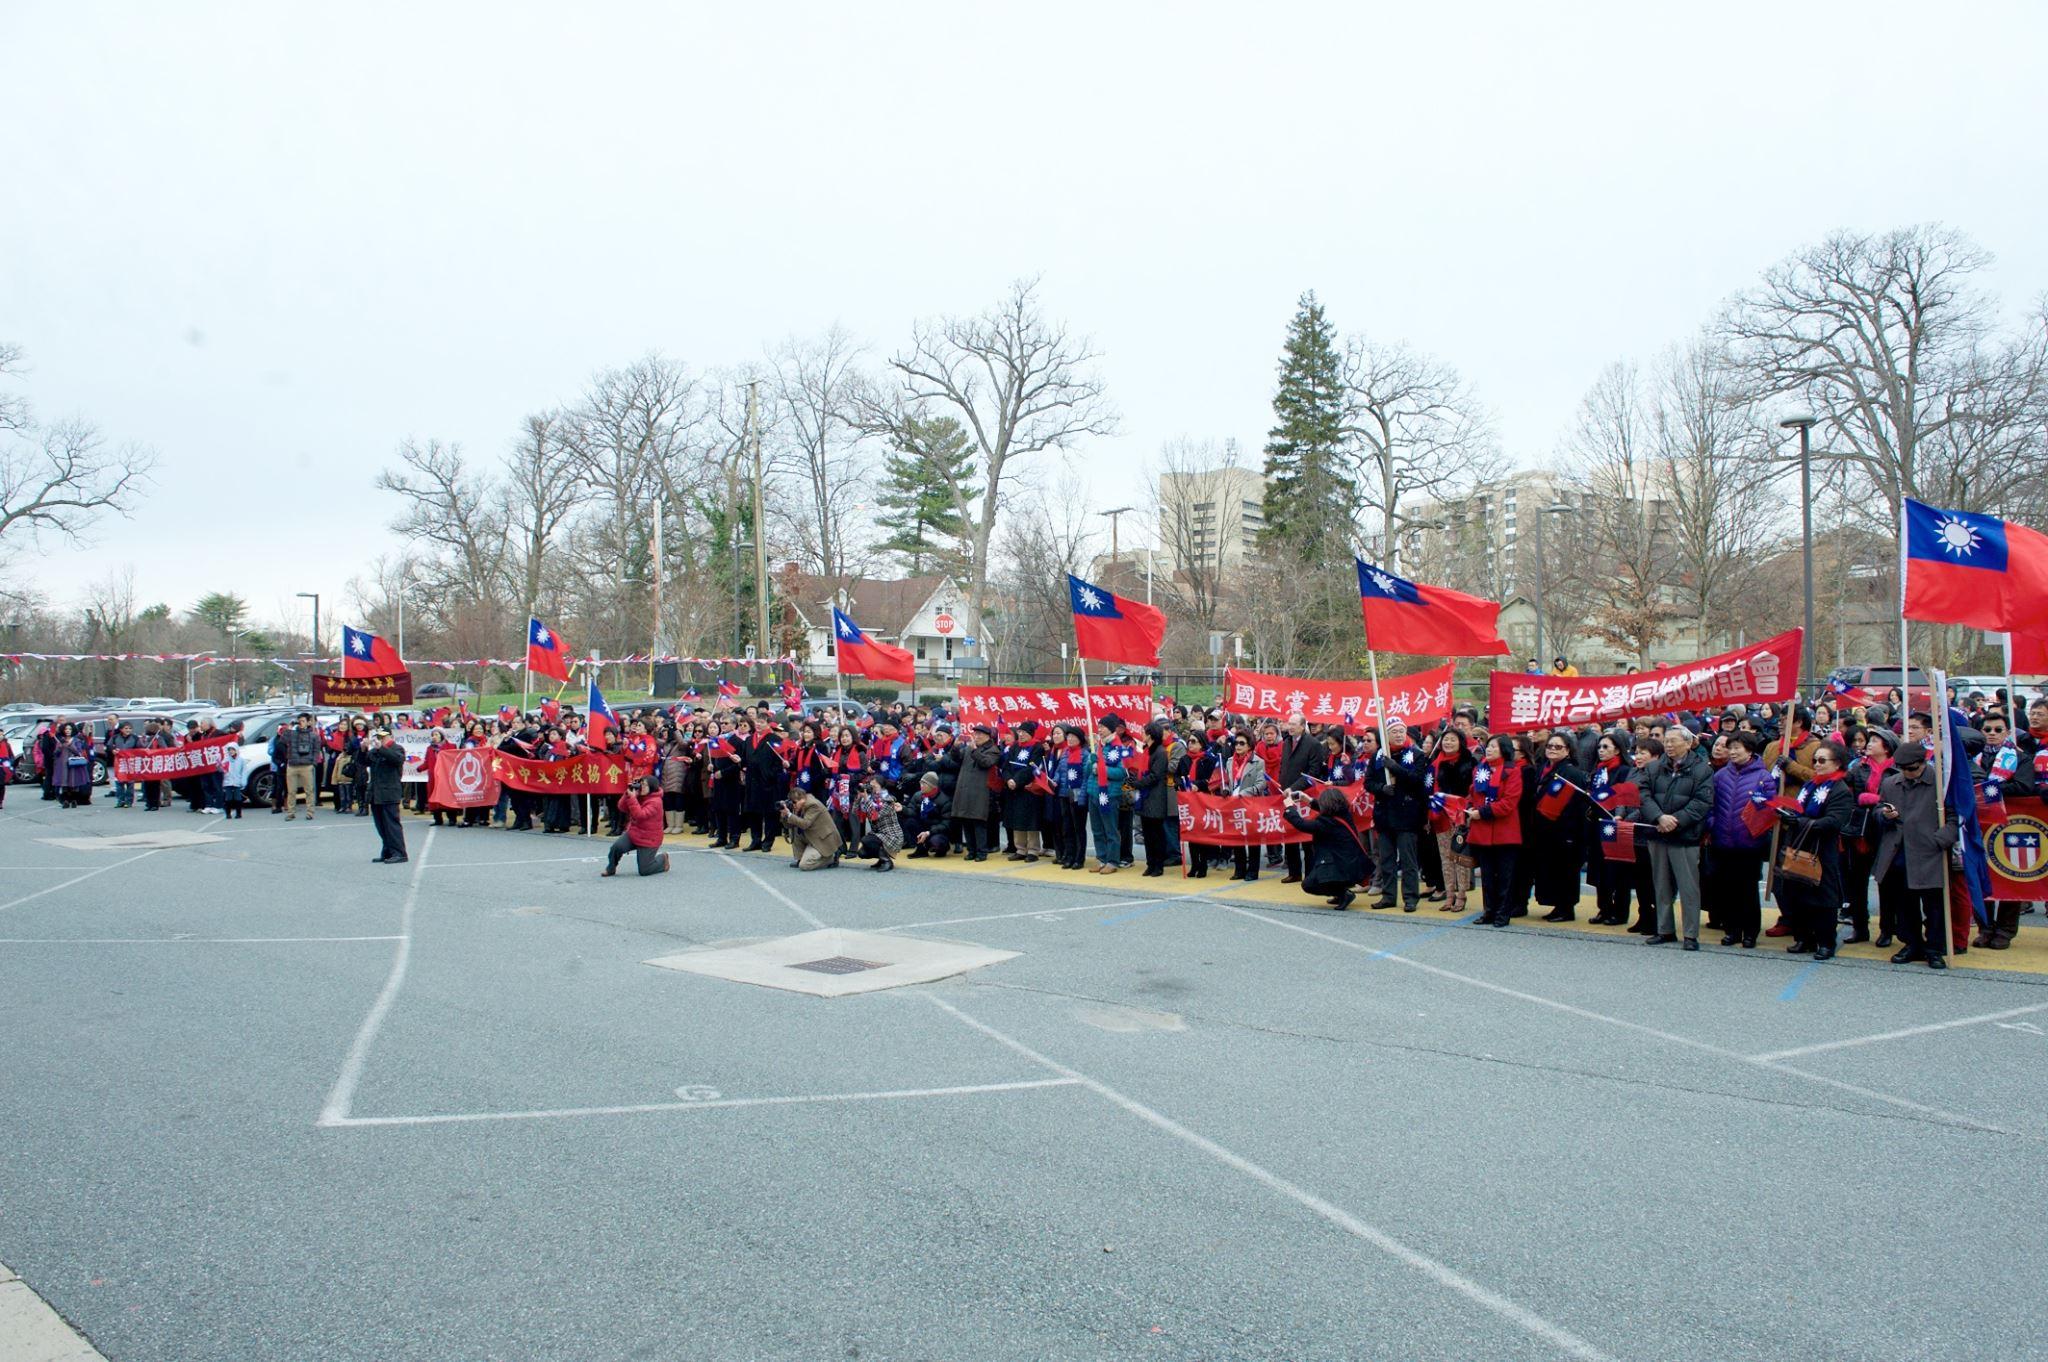 Although the temperature was down to 40°F, there were over 500 community leaders and Taiwan students participating in the flag-raising ceremony.